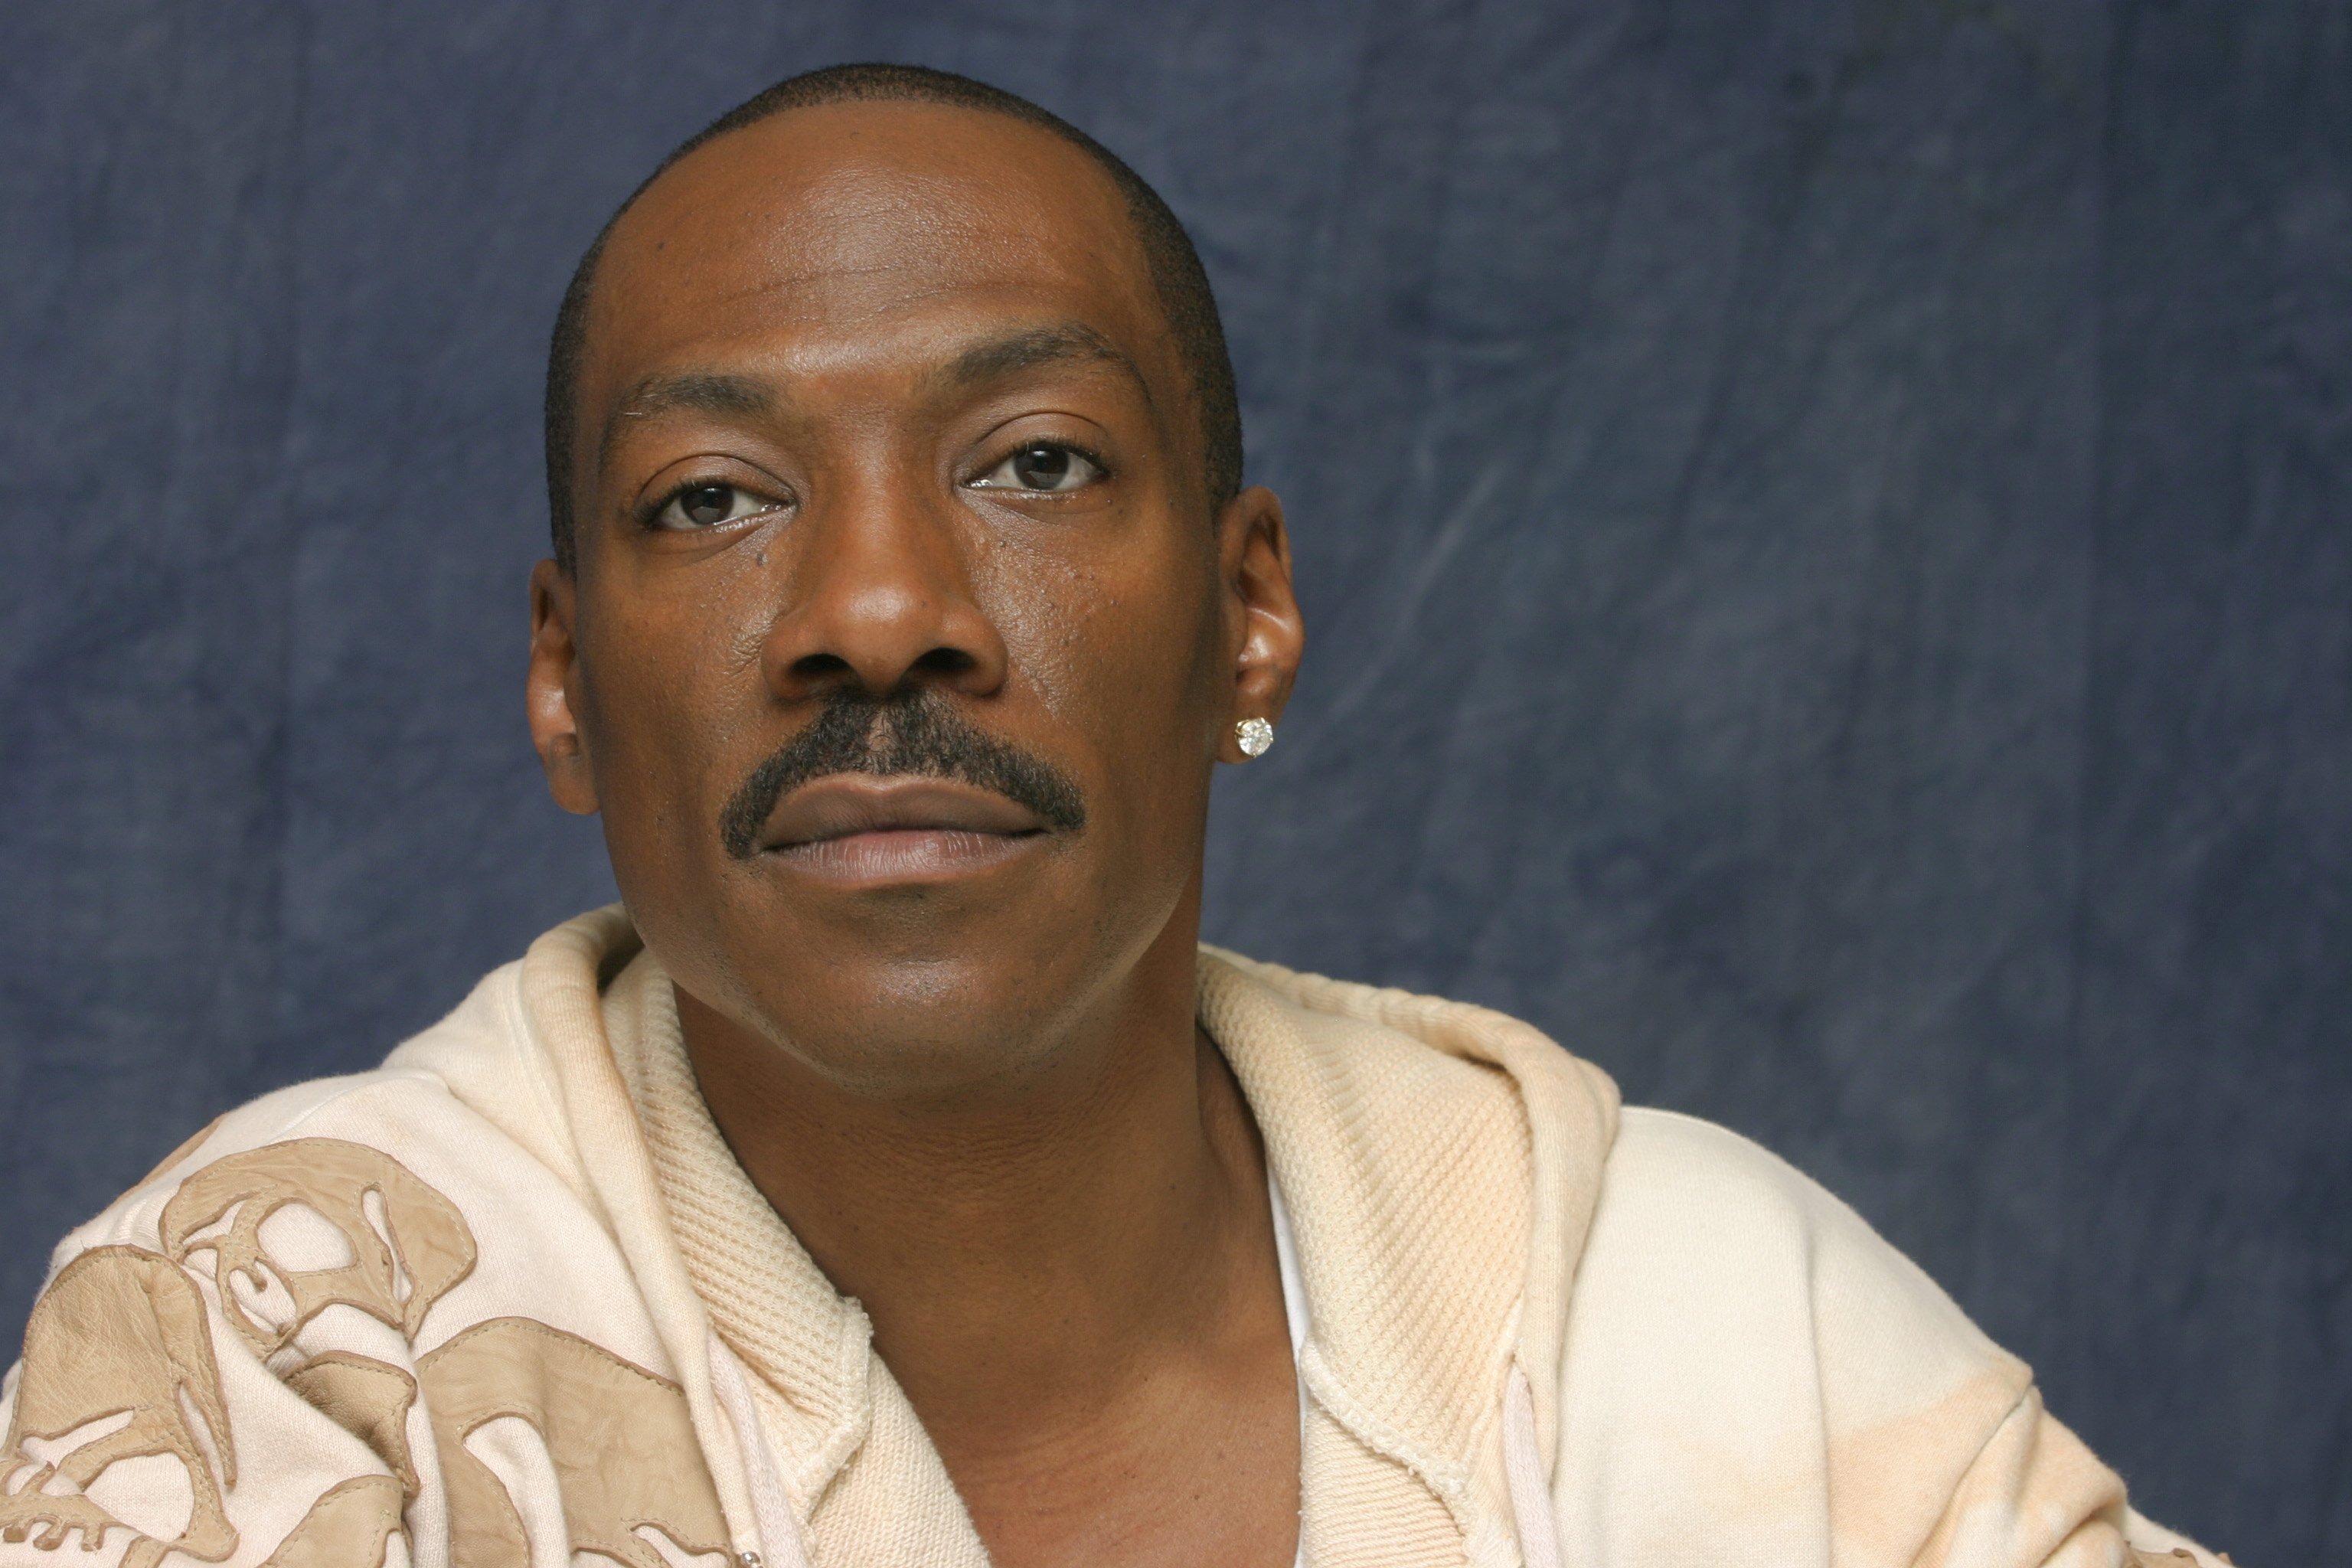 Actor Eddie Murphy's portrait session for his film "Shrek the Third" in Los Angeles, California in 2007. | Source: Getty Images